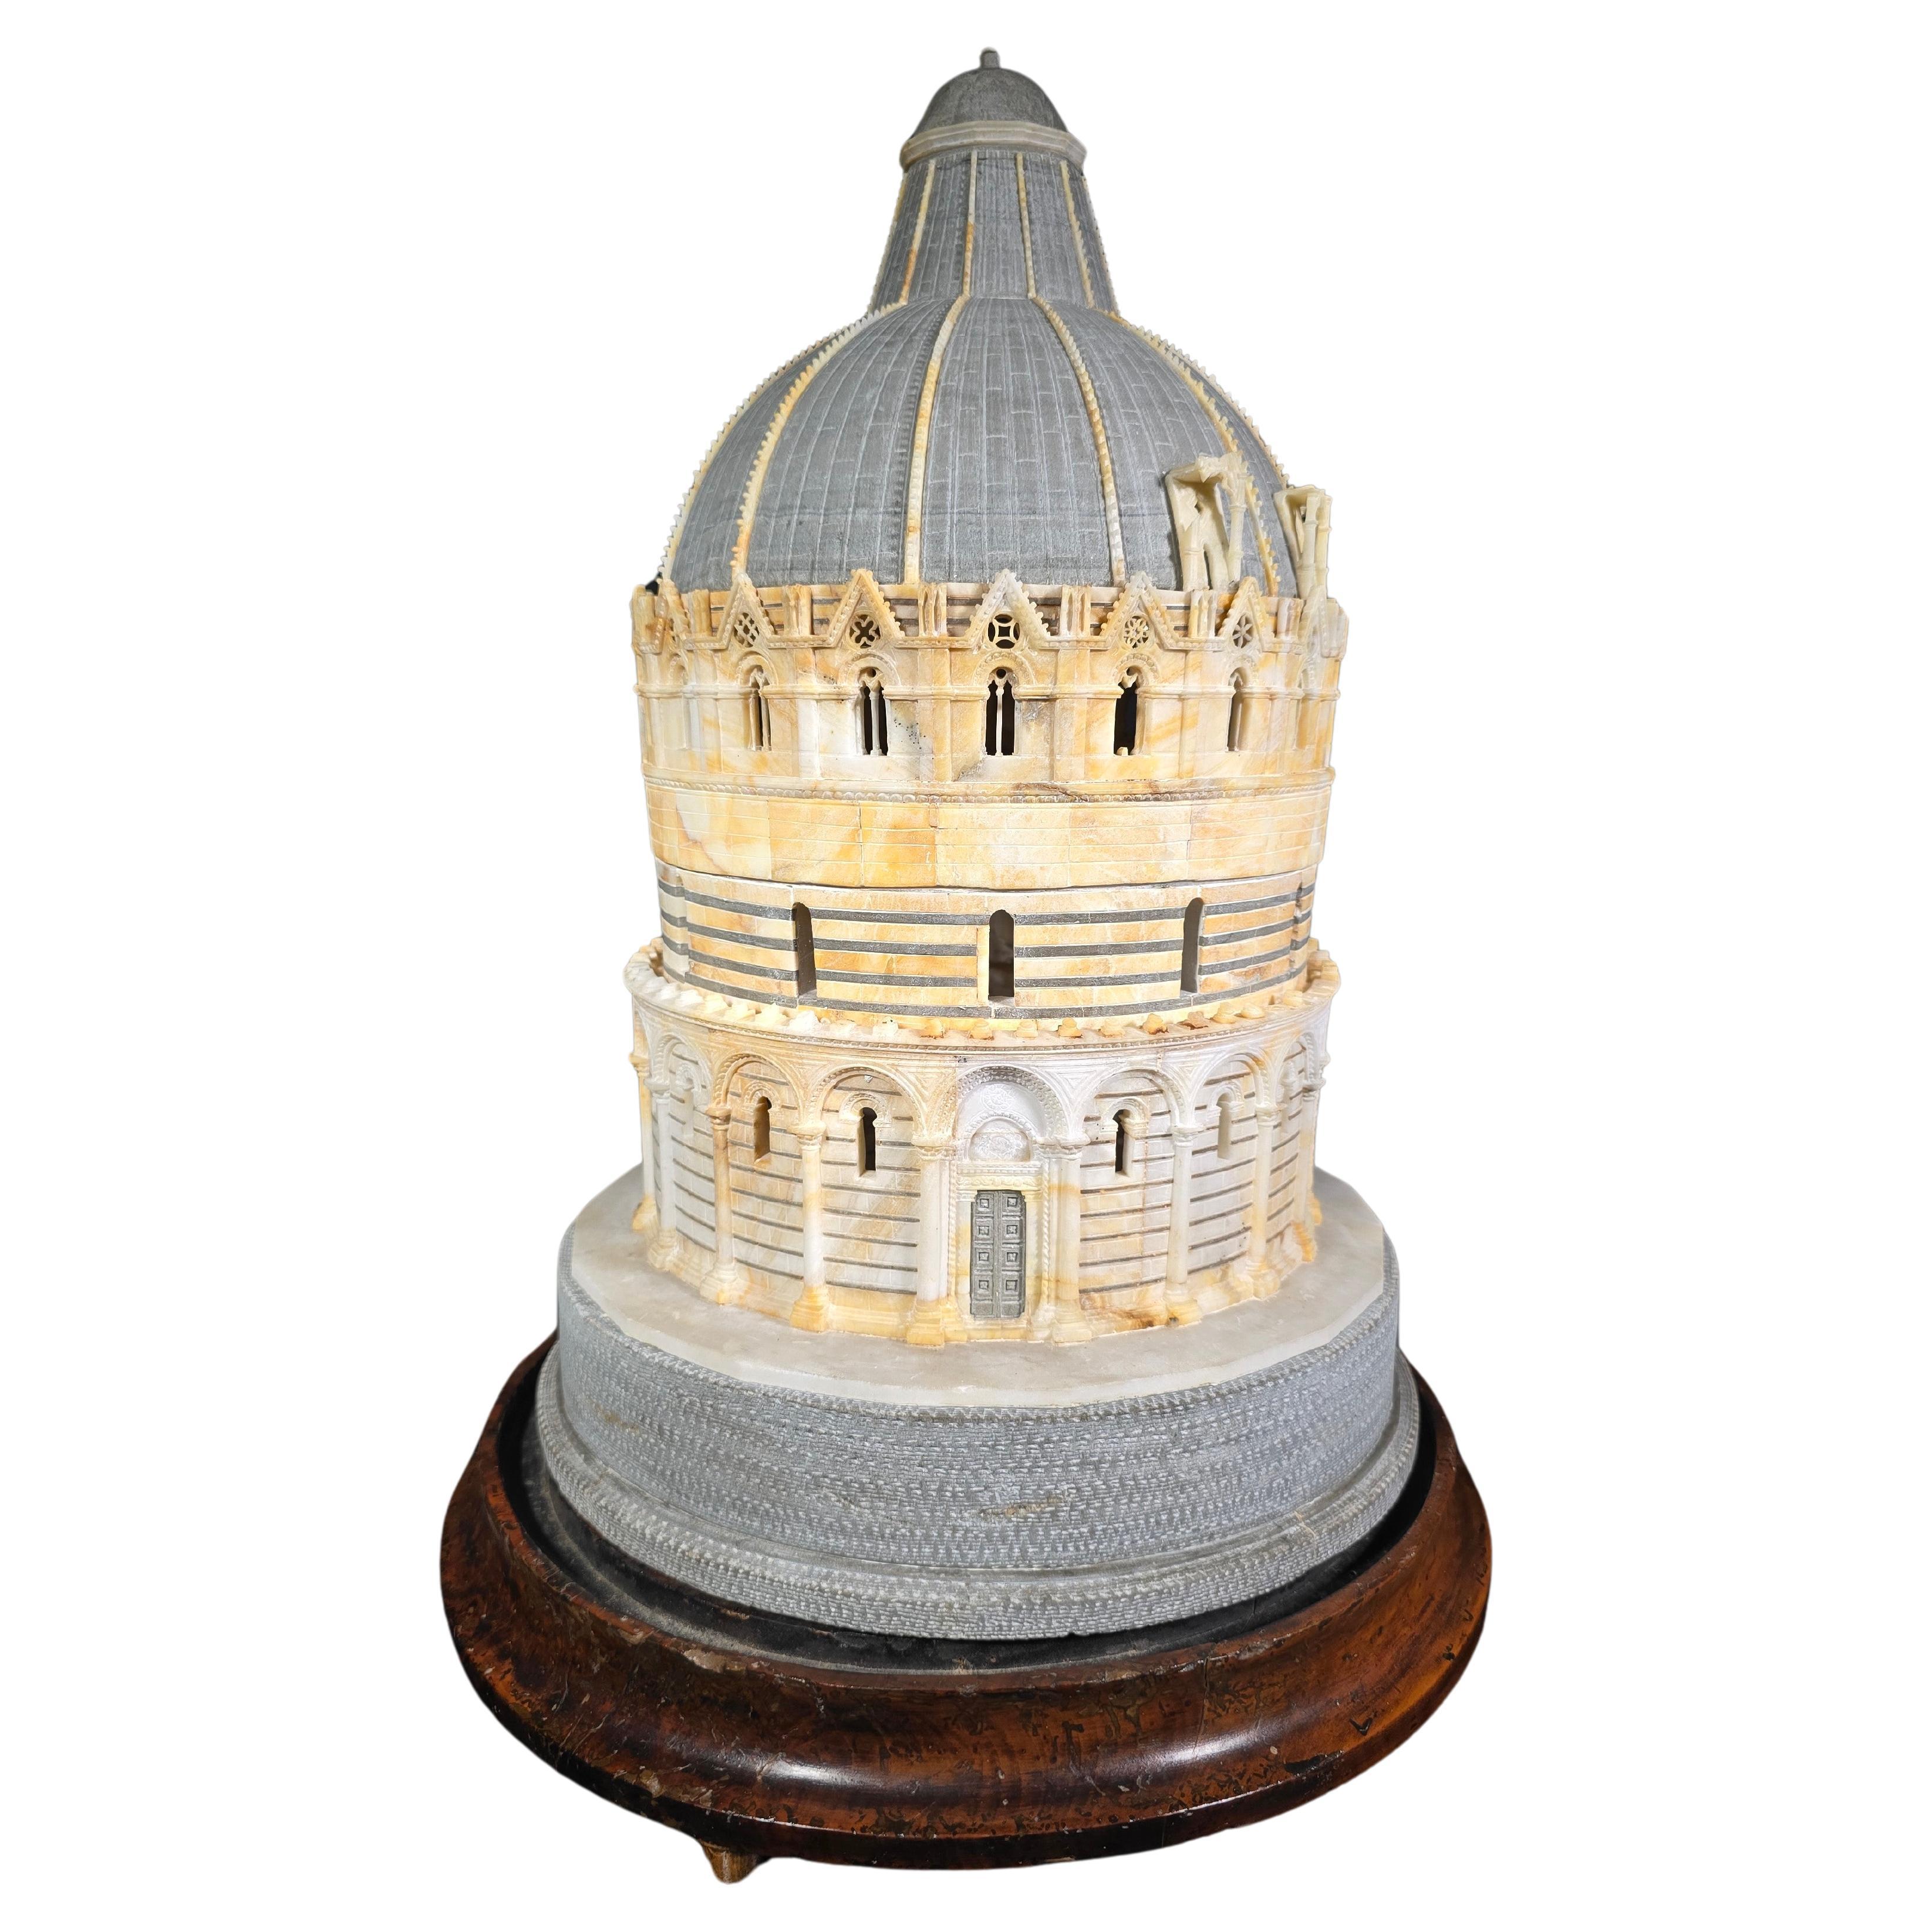  Sculpture of The Baptistery, Pisa - Giuseppe Andreoni's Grand Tour For Sale